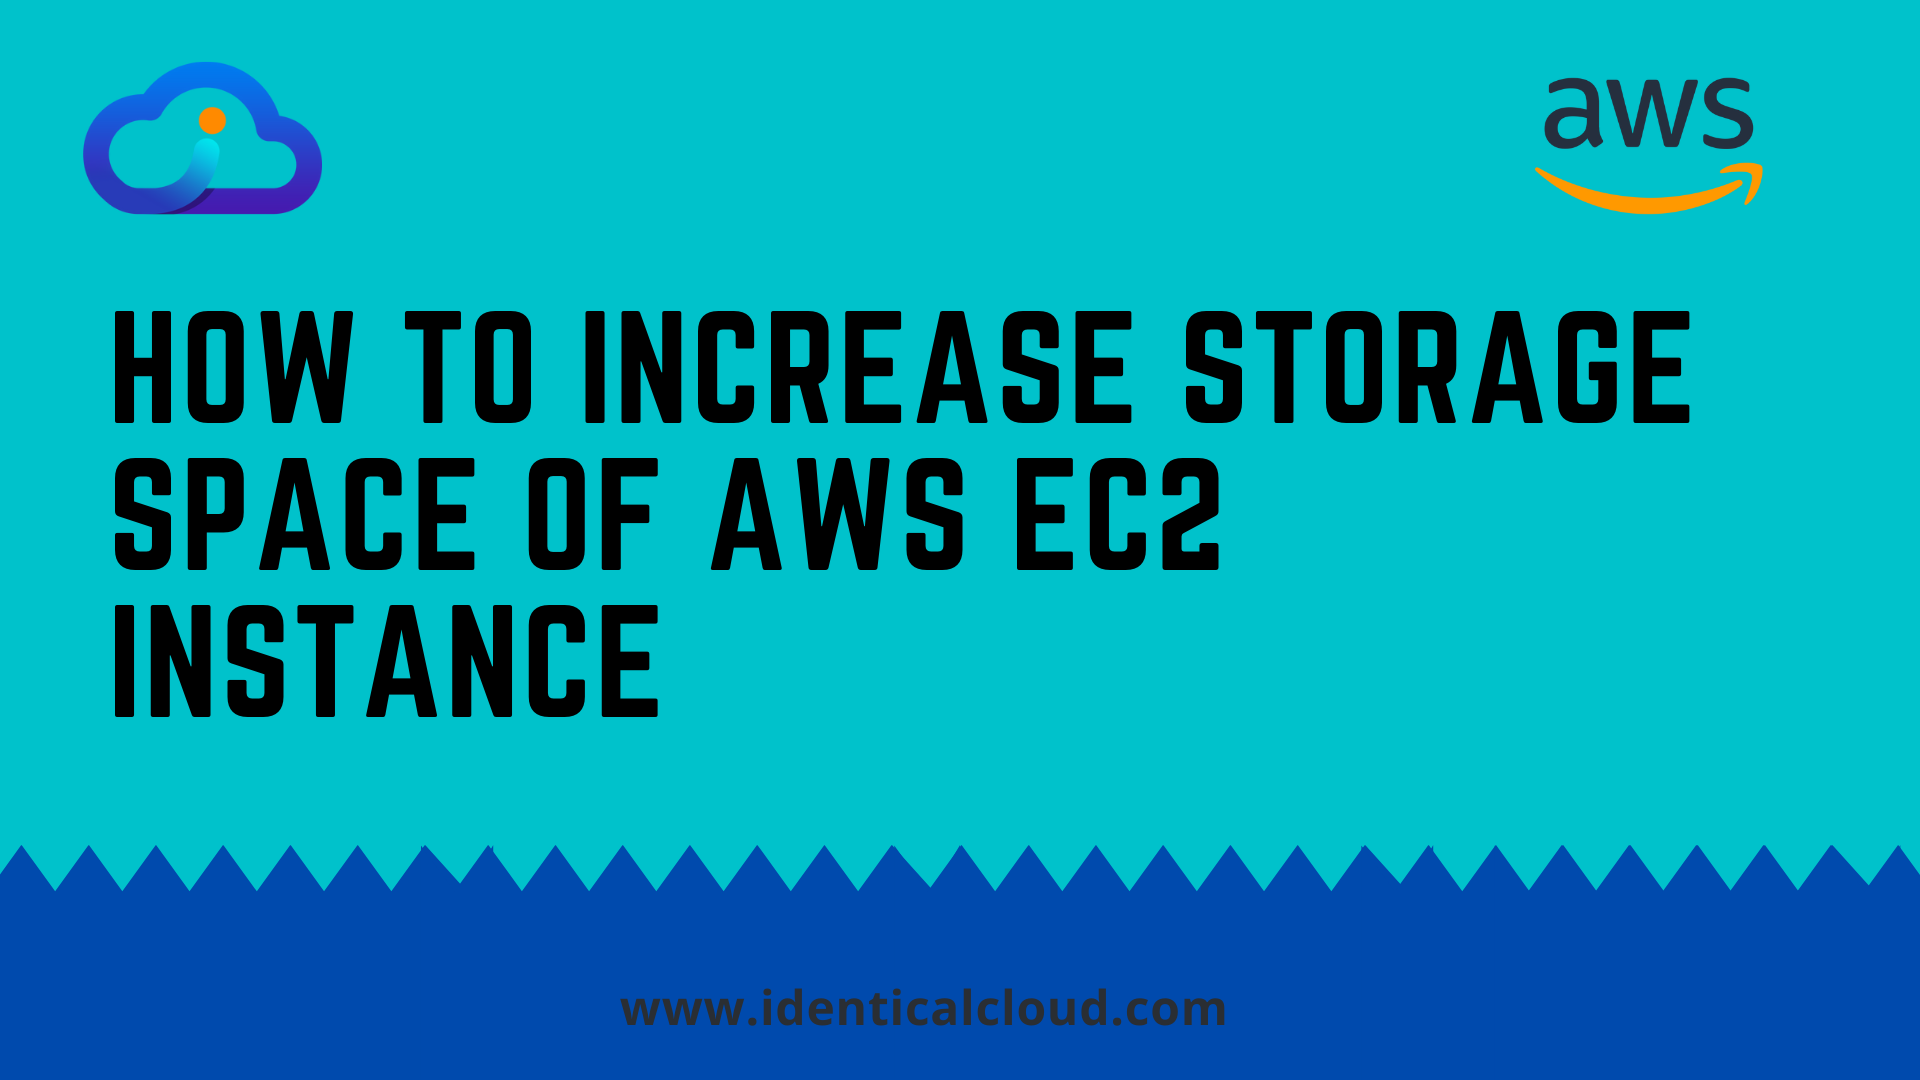 How to increase storage space of AWS EC2 instance